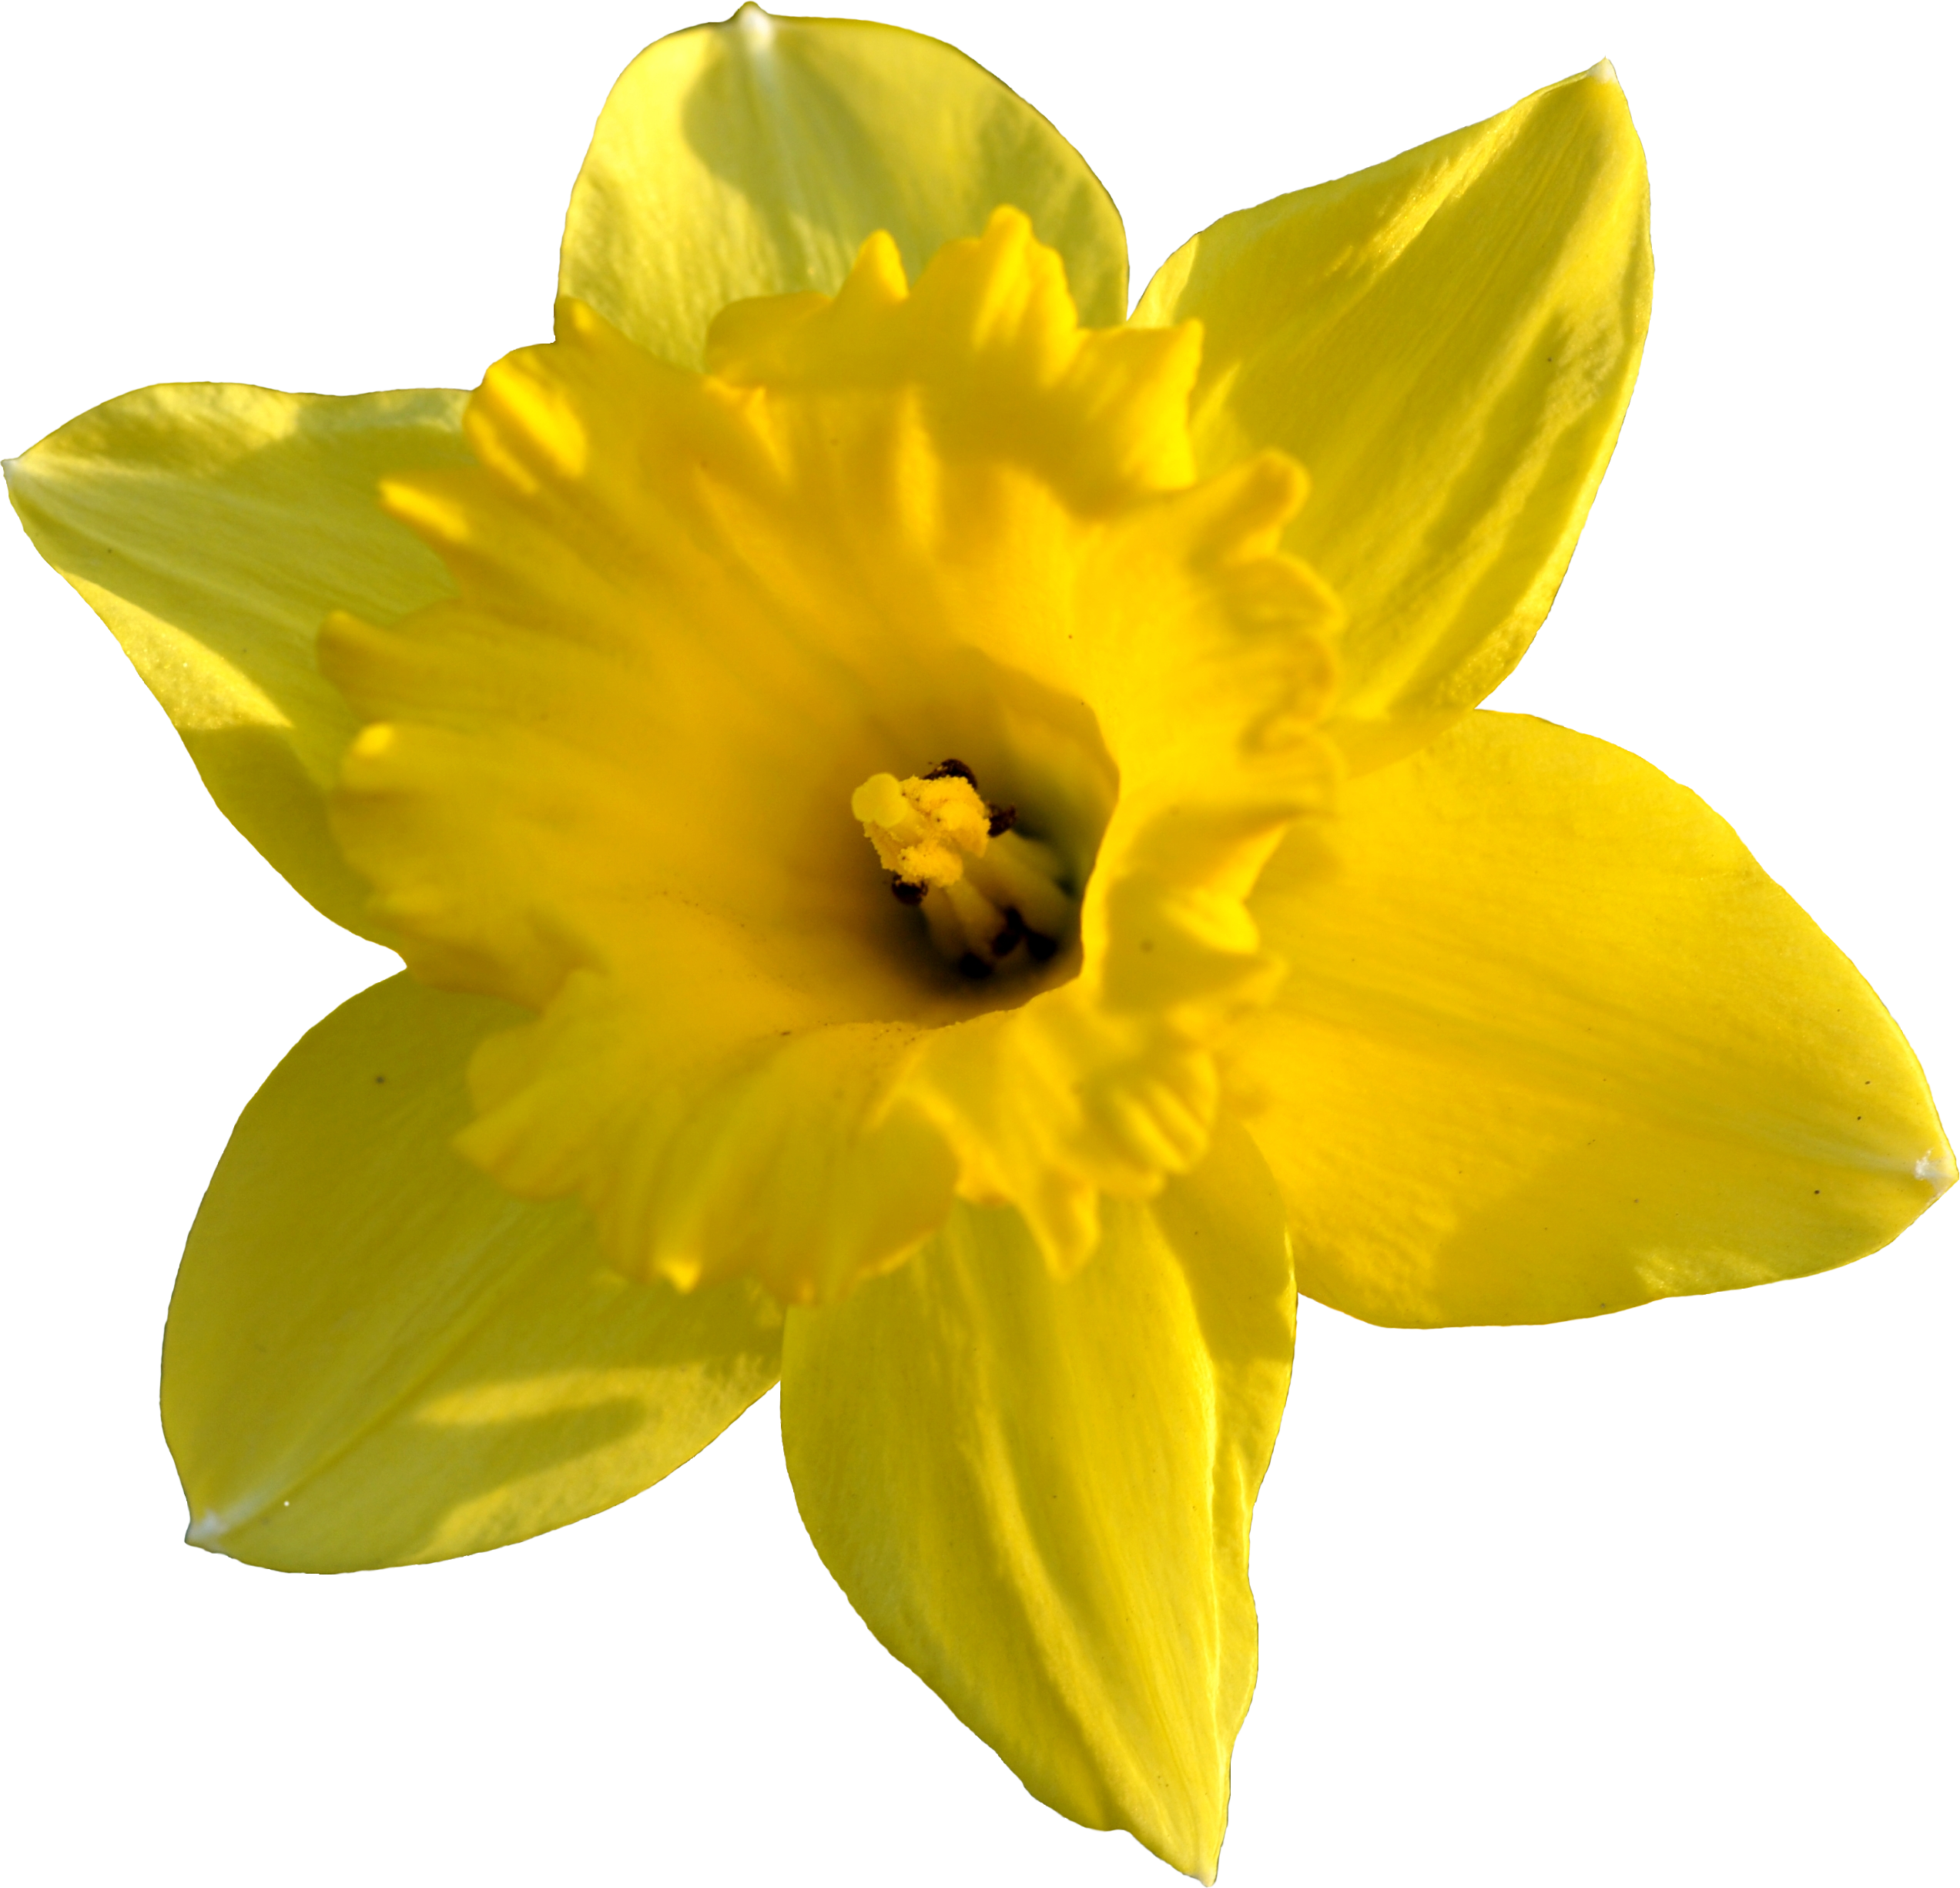 Daffodil Images  Pictures - Becuo